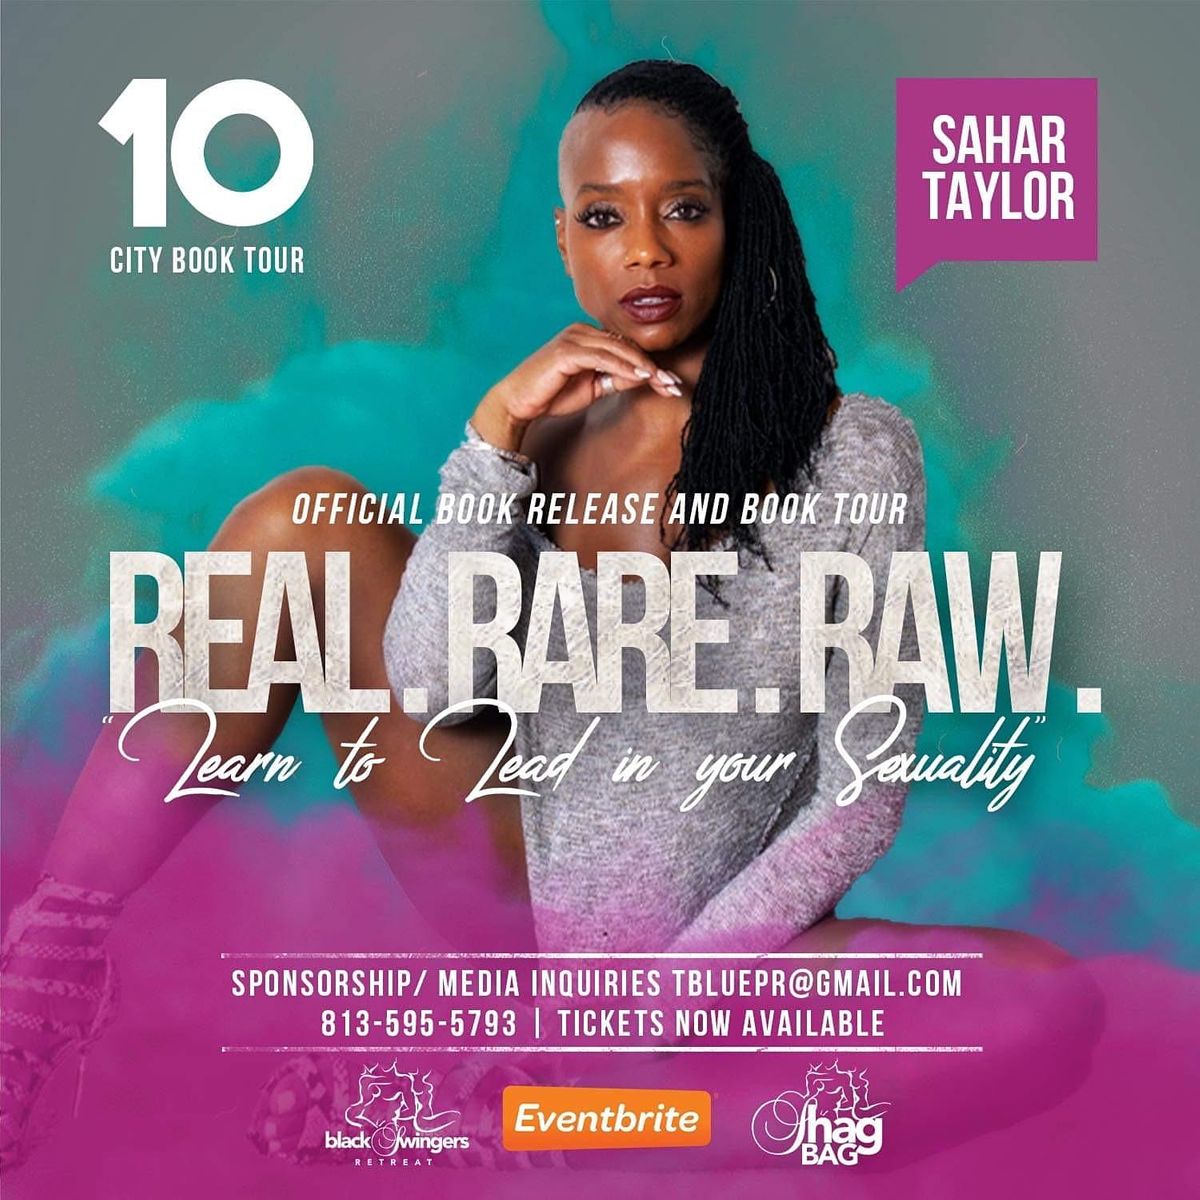 REAL.RARE.RAW "Learn to Lead in your SEXuality" w\/Sahar Taylor